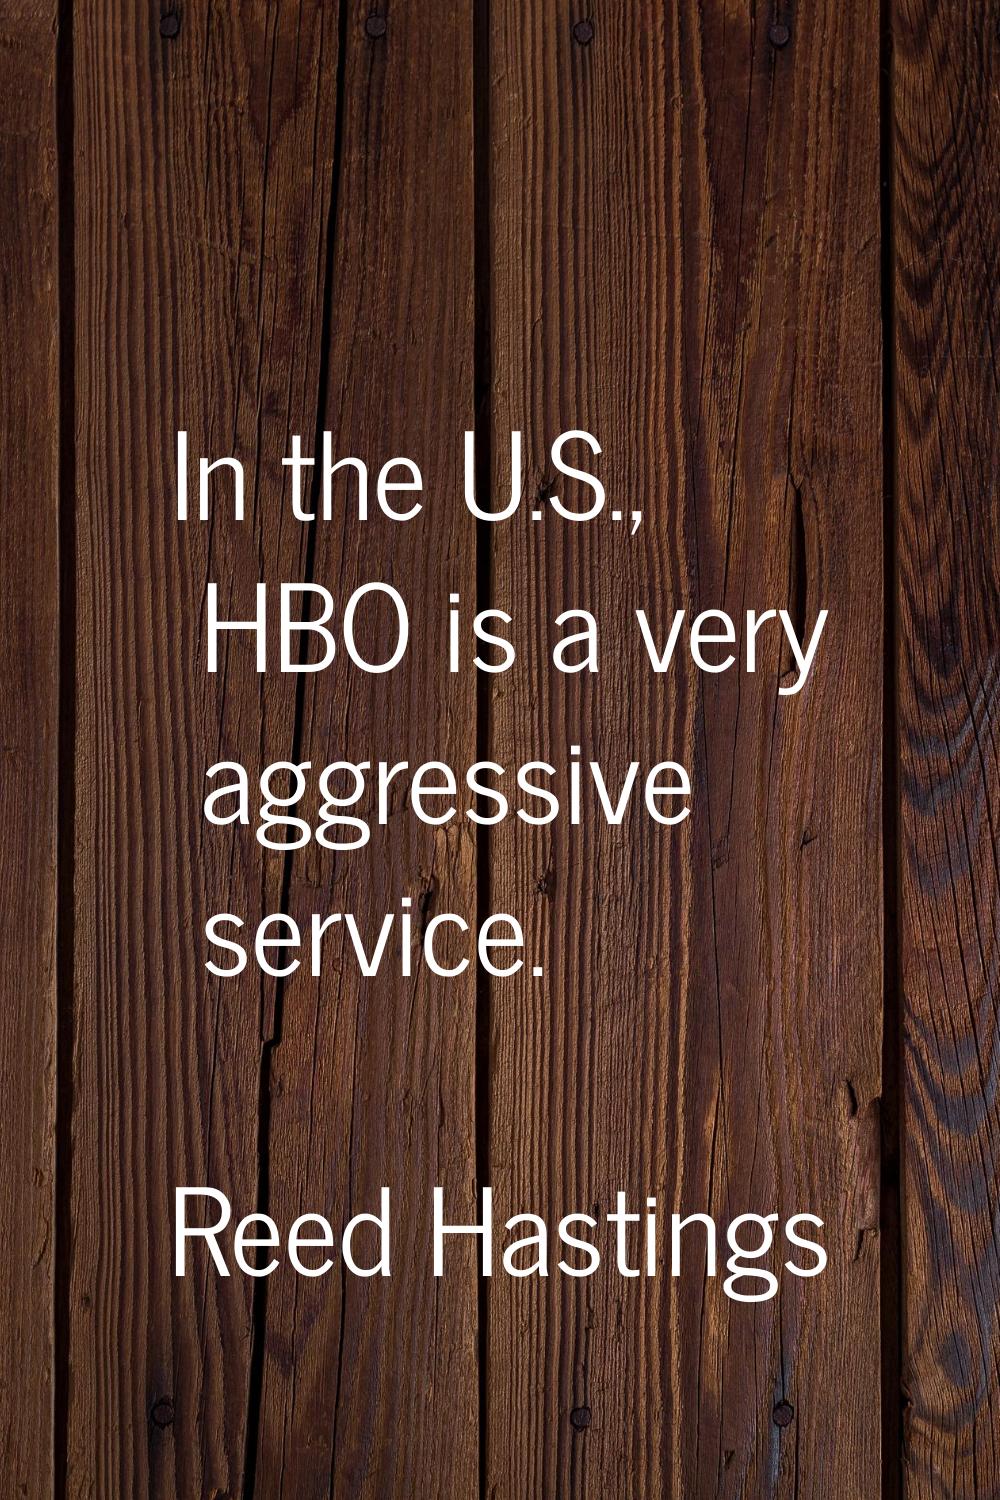 In the U.S., HBO is a very aggressive service.